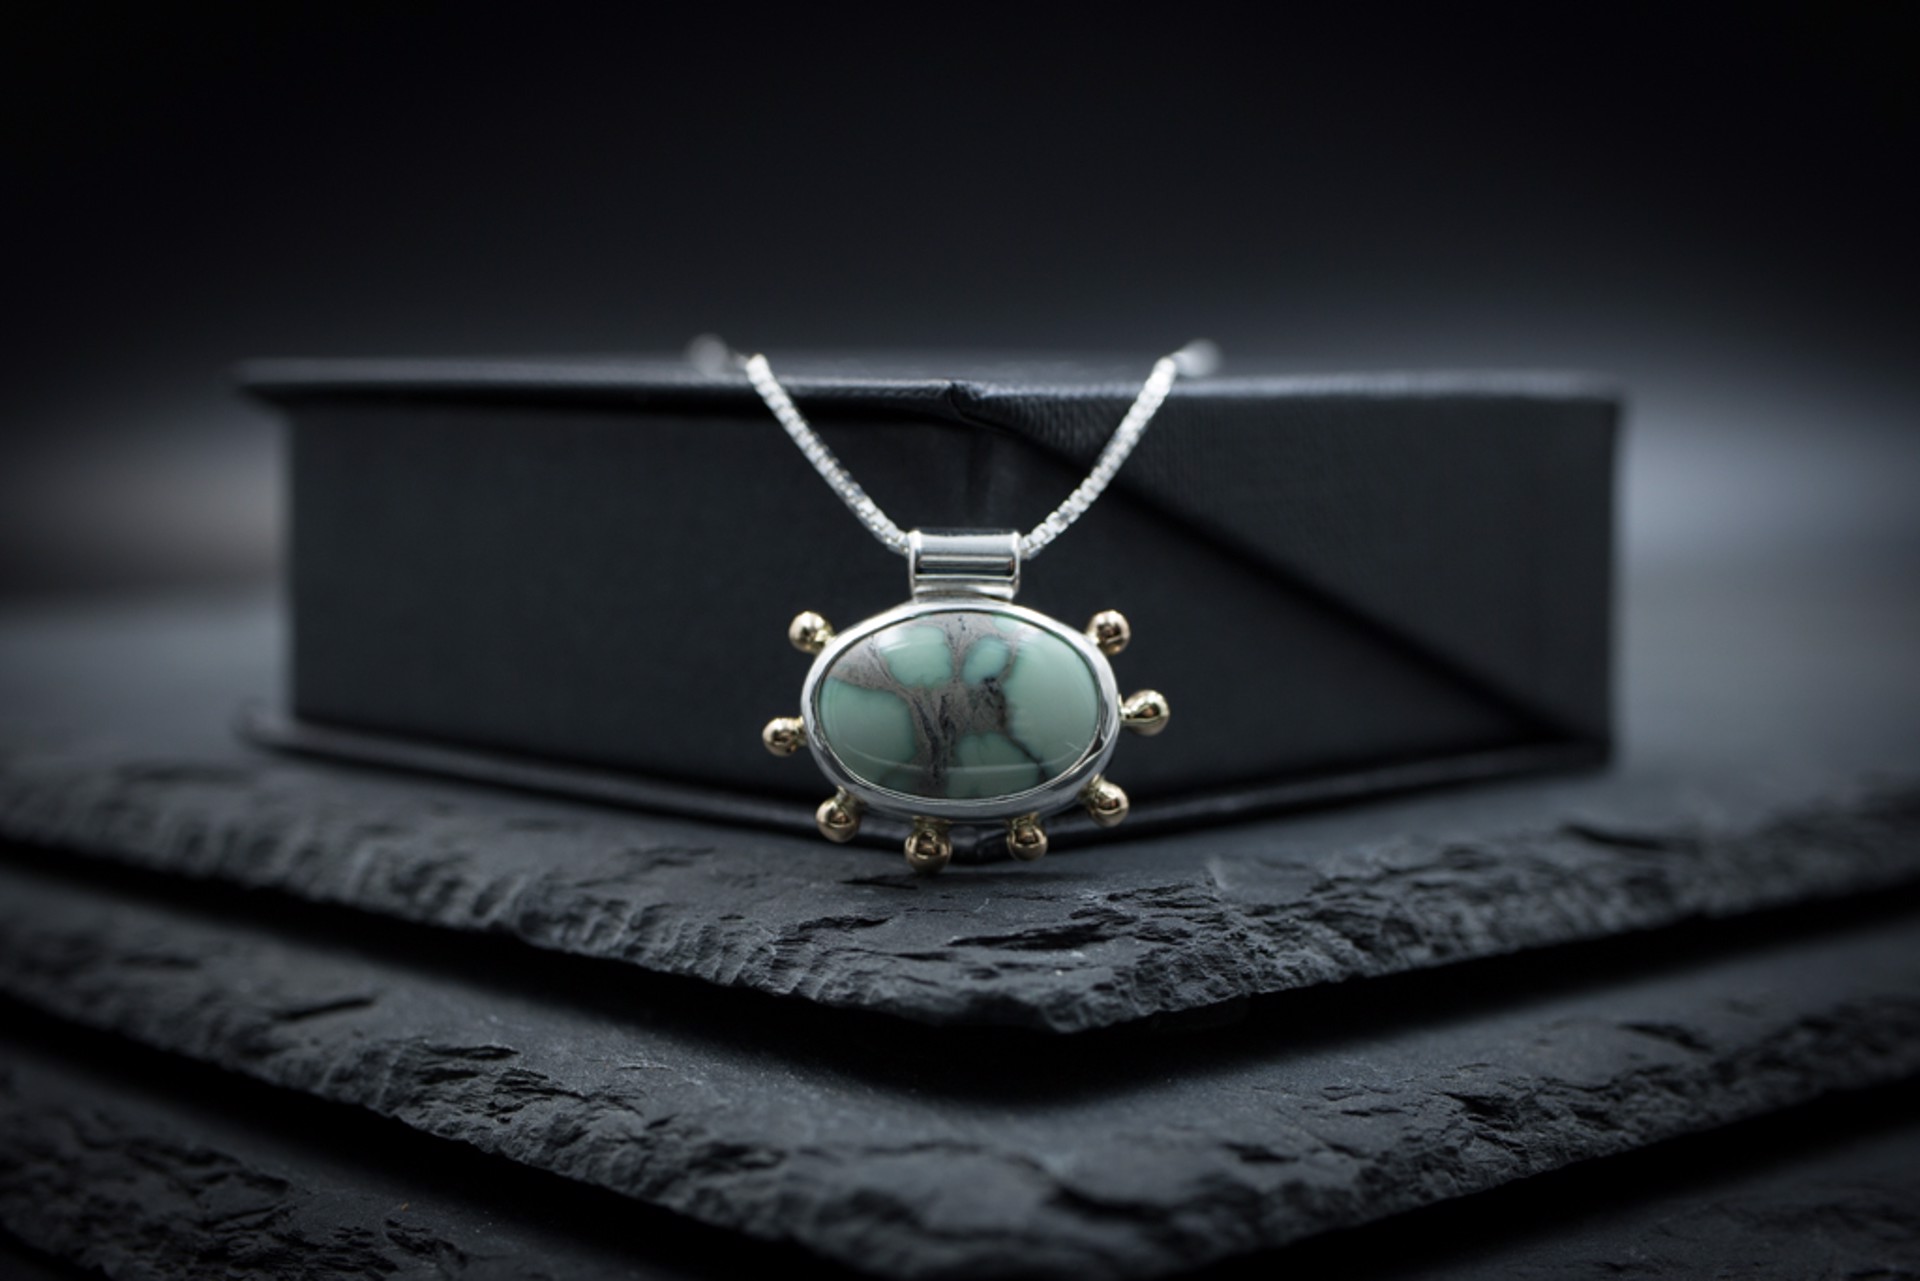 Variscite in 14K Gold and Sterling Silver Necklace by Autumn Fye